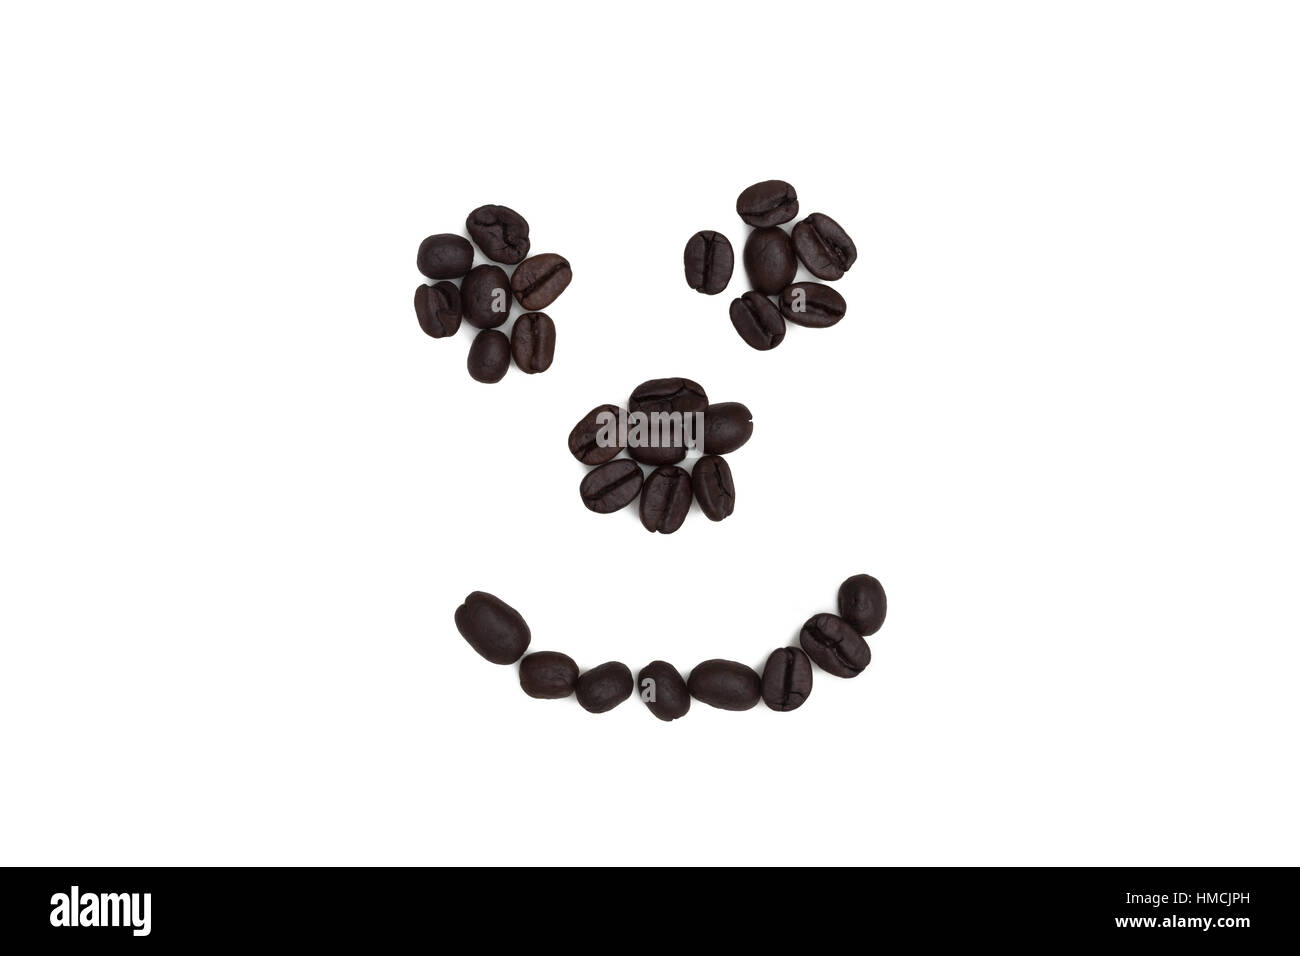 A smiley face made from coffee beans on a white background Stock Photo